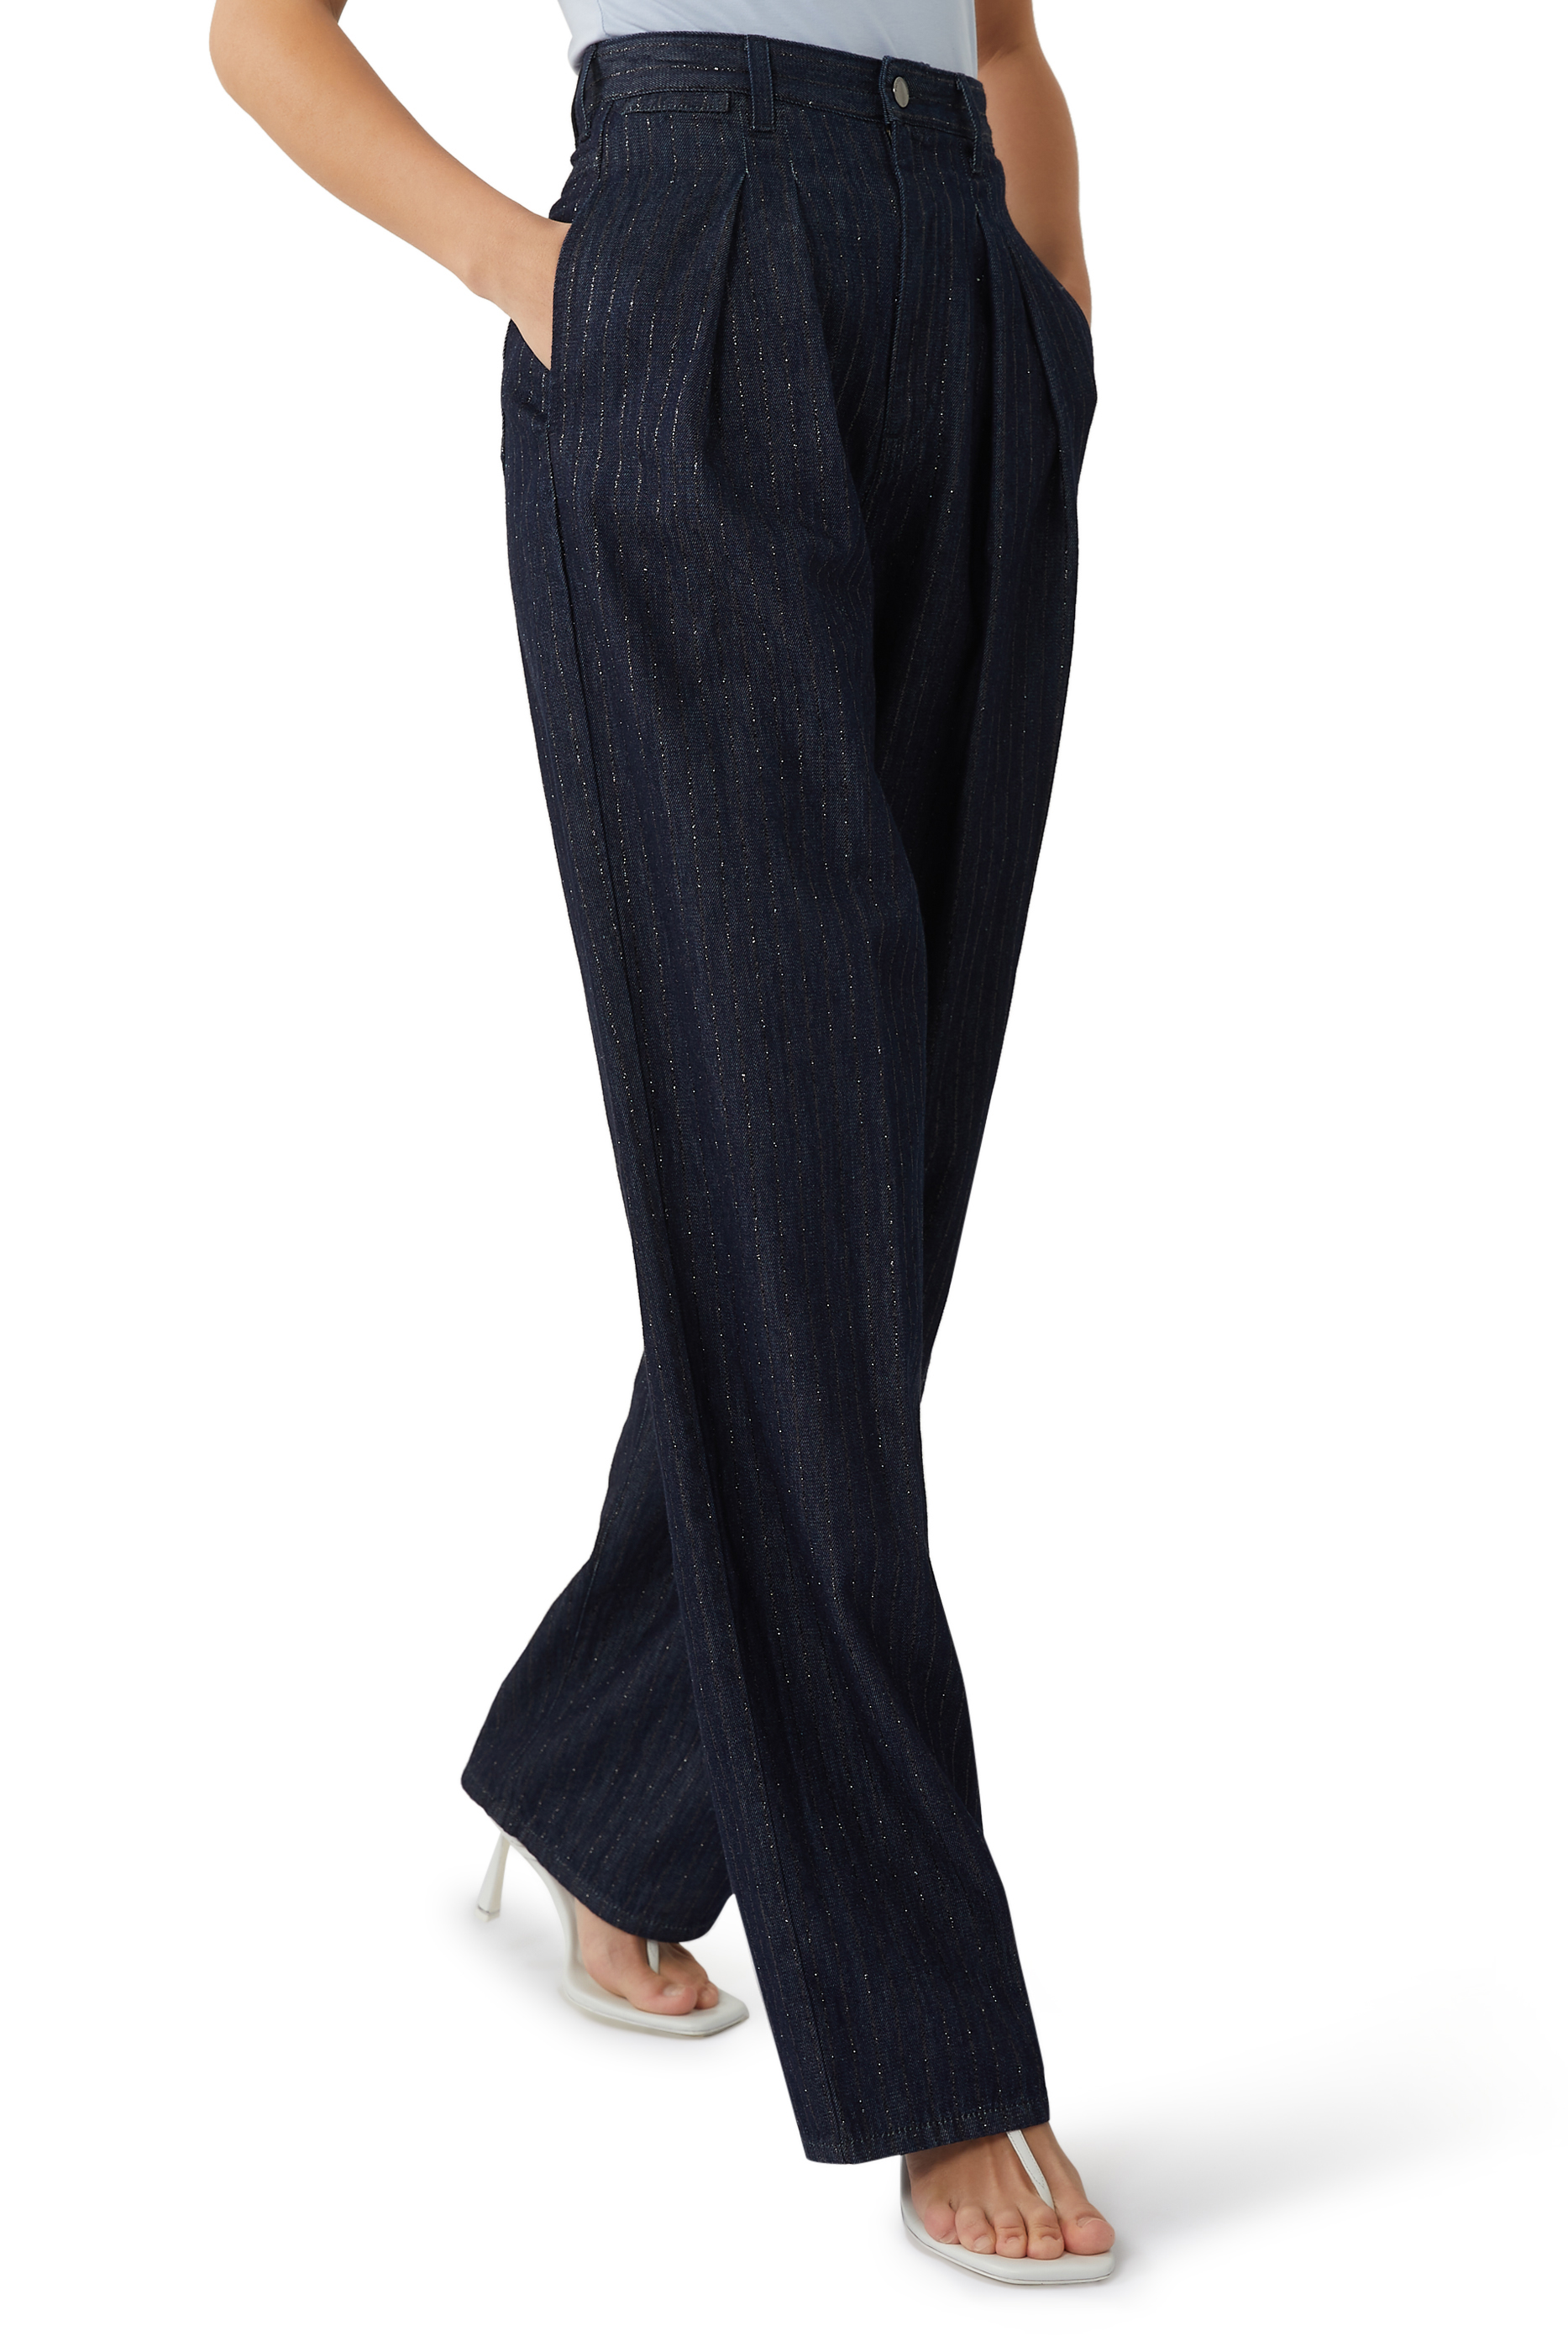 Buy Emporio Armani Baggy Glitter Pinstripe Jeans for Womens ...